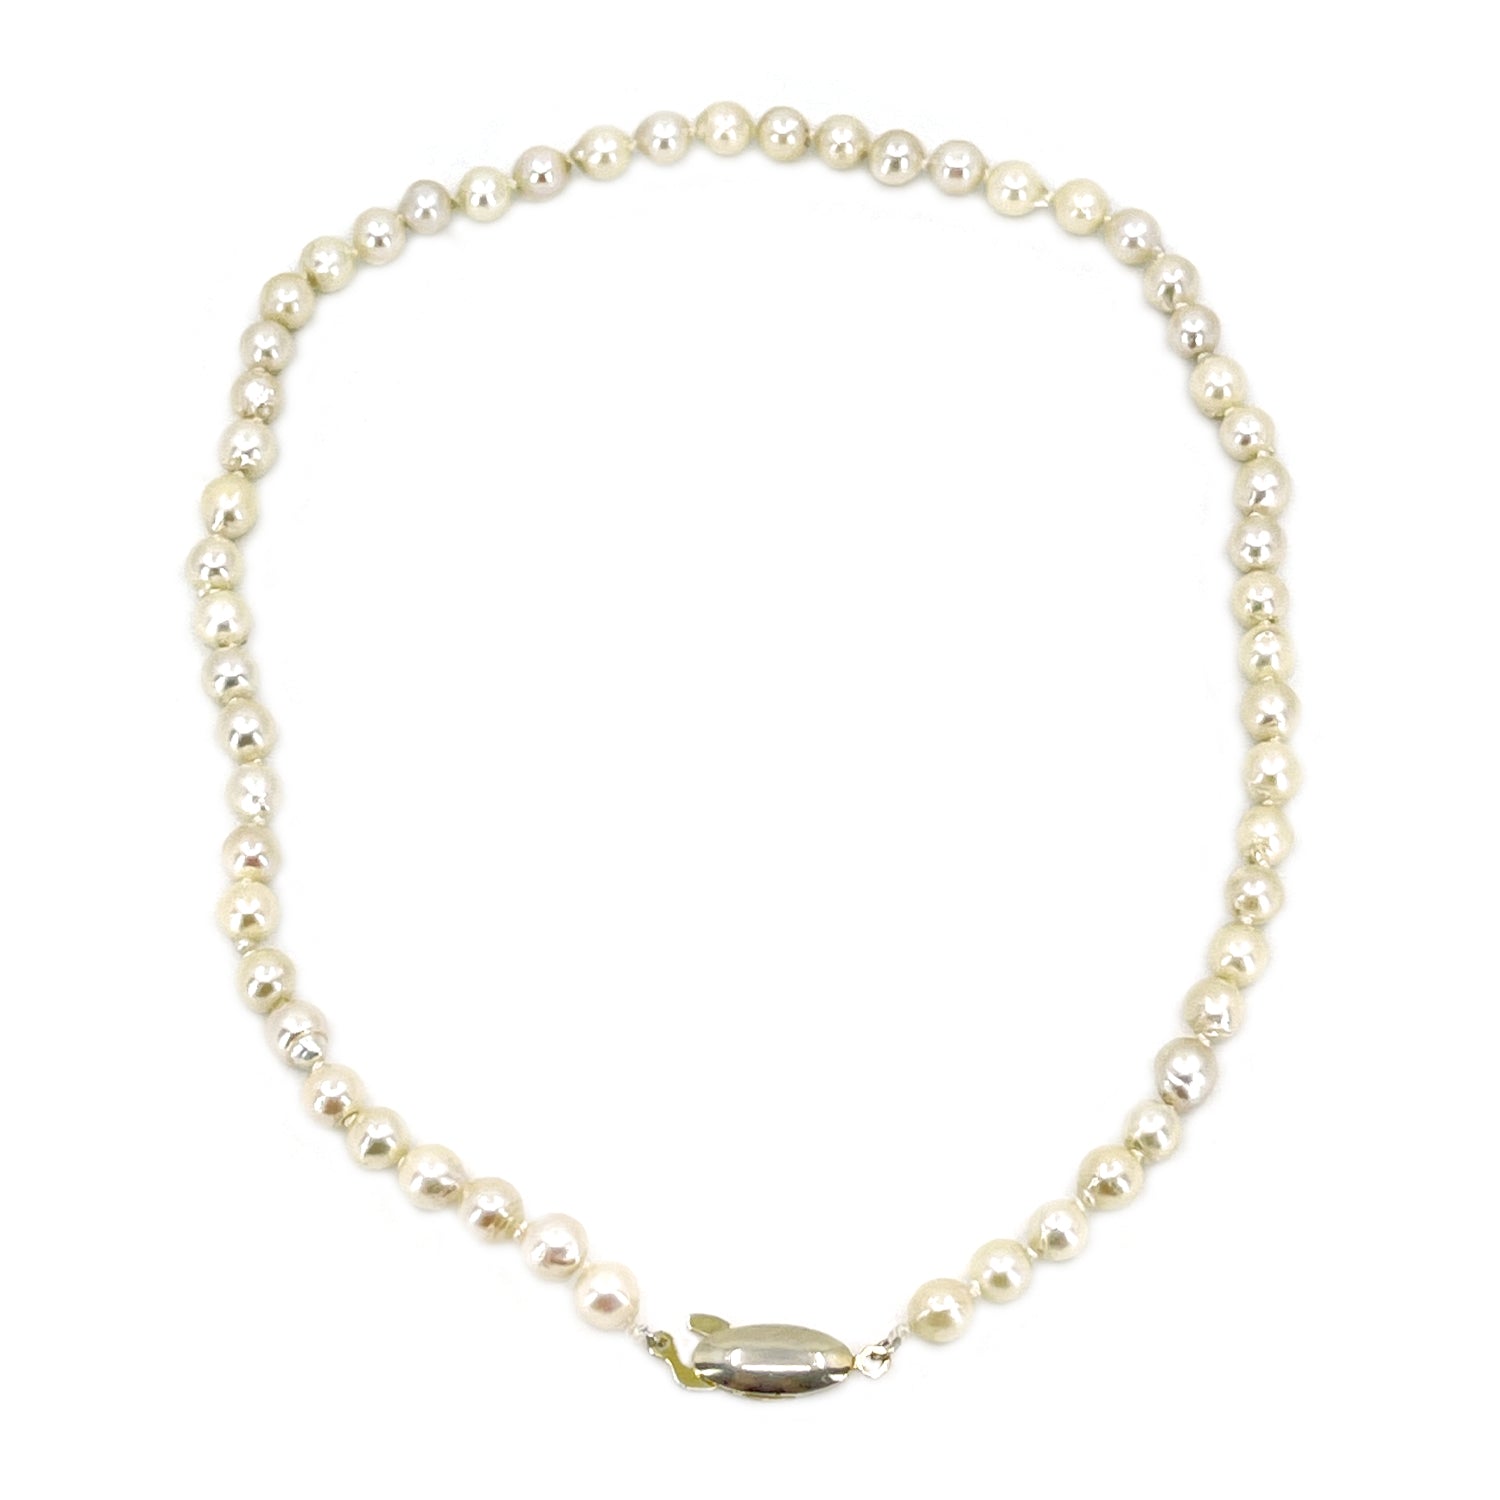 Choker Baroque Vintage Japanese Saltwater Cultured Akoya Pearl Necklace - Sterling Silver Gold Wash 15.50 Inch